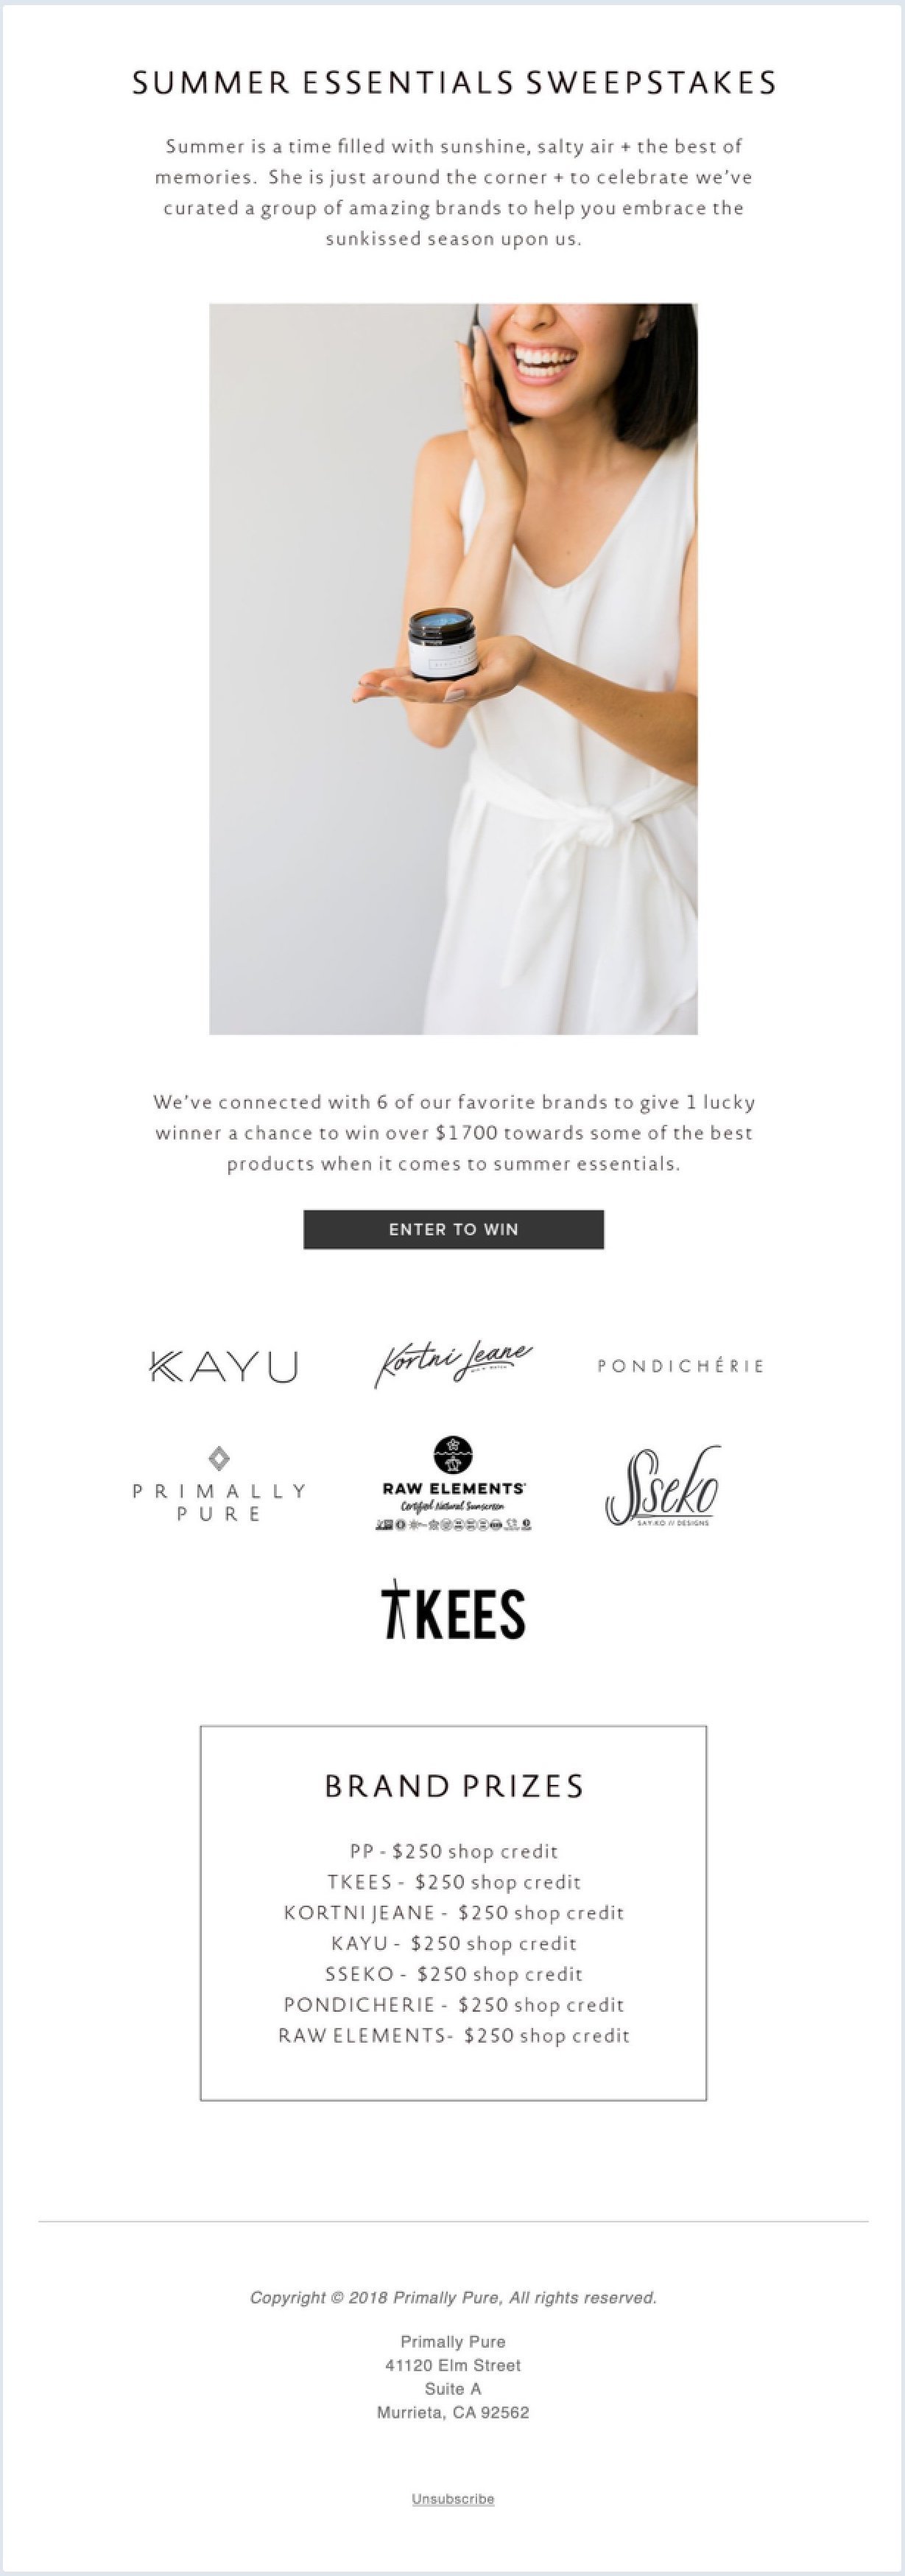 Primally Pure summer newsletter example minimal white tones